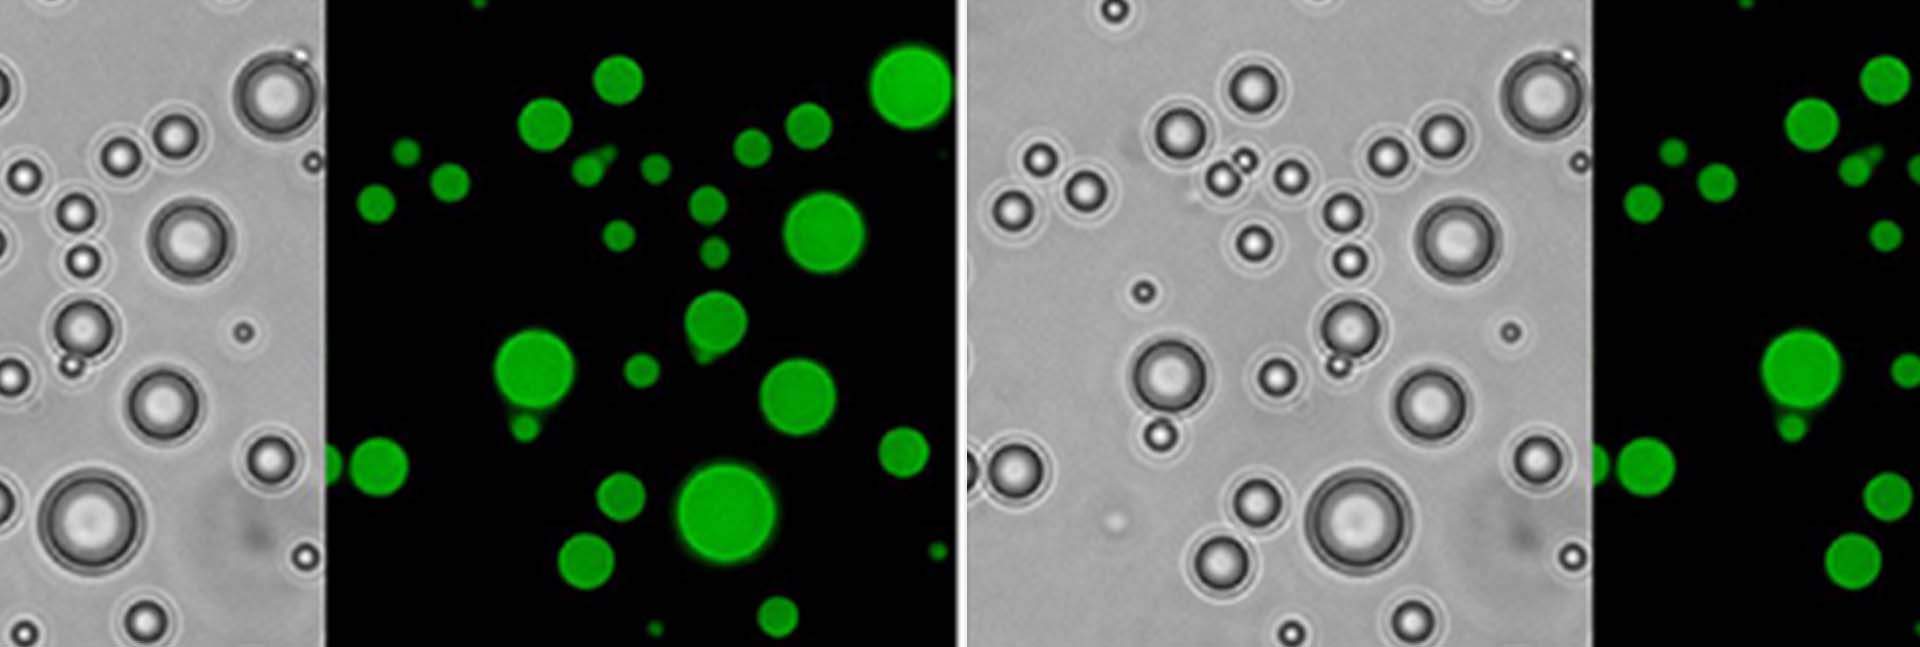 Proteins with primitive arginine-based proteins (right) might have been capable of self-assembly and phase separation to create cell-like droplets 